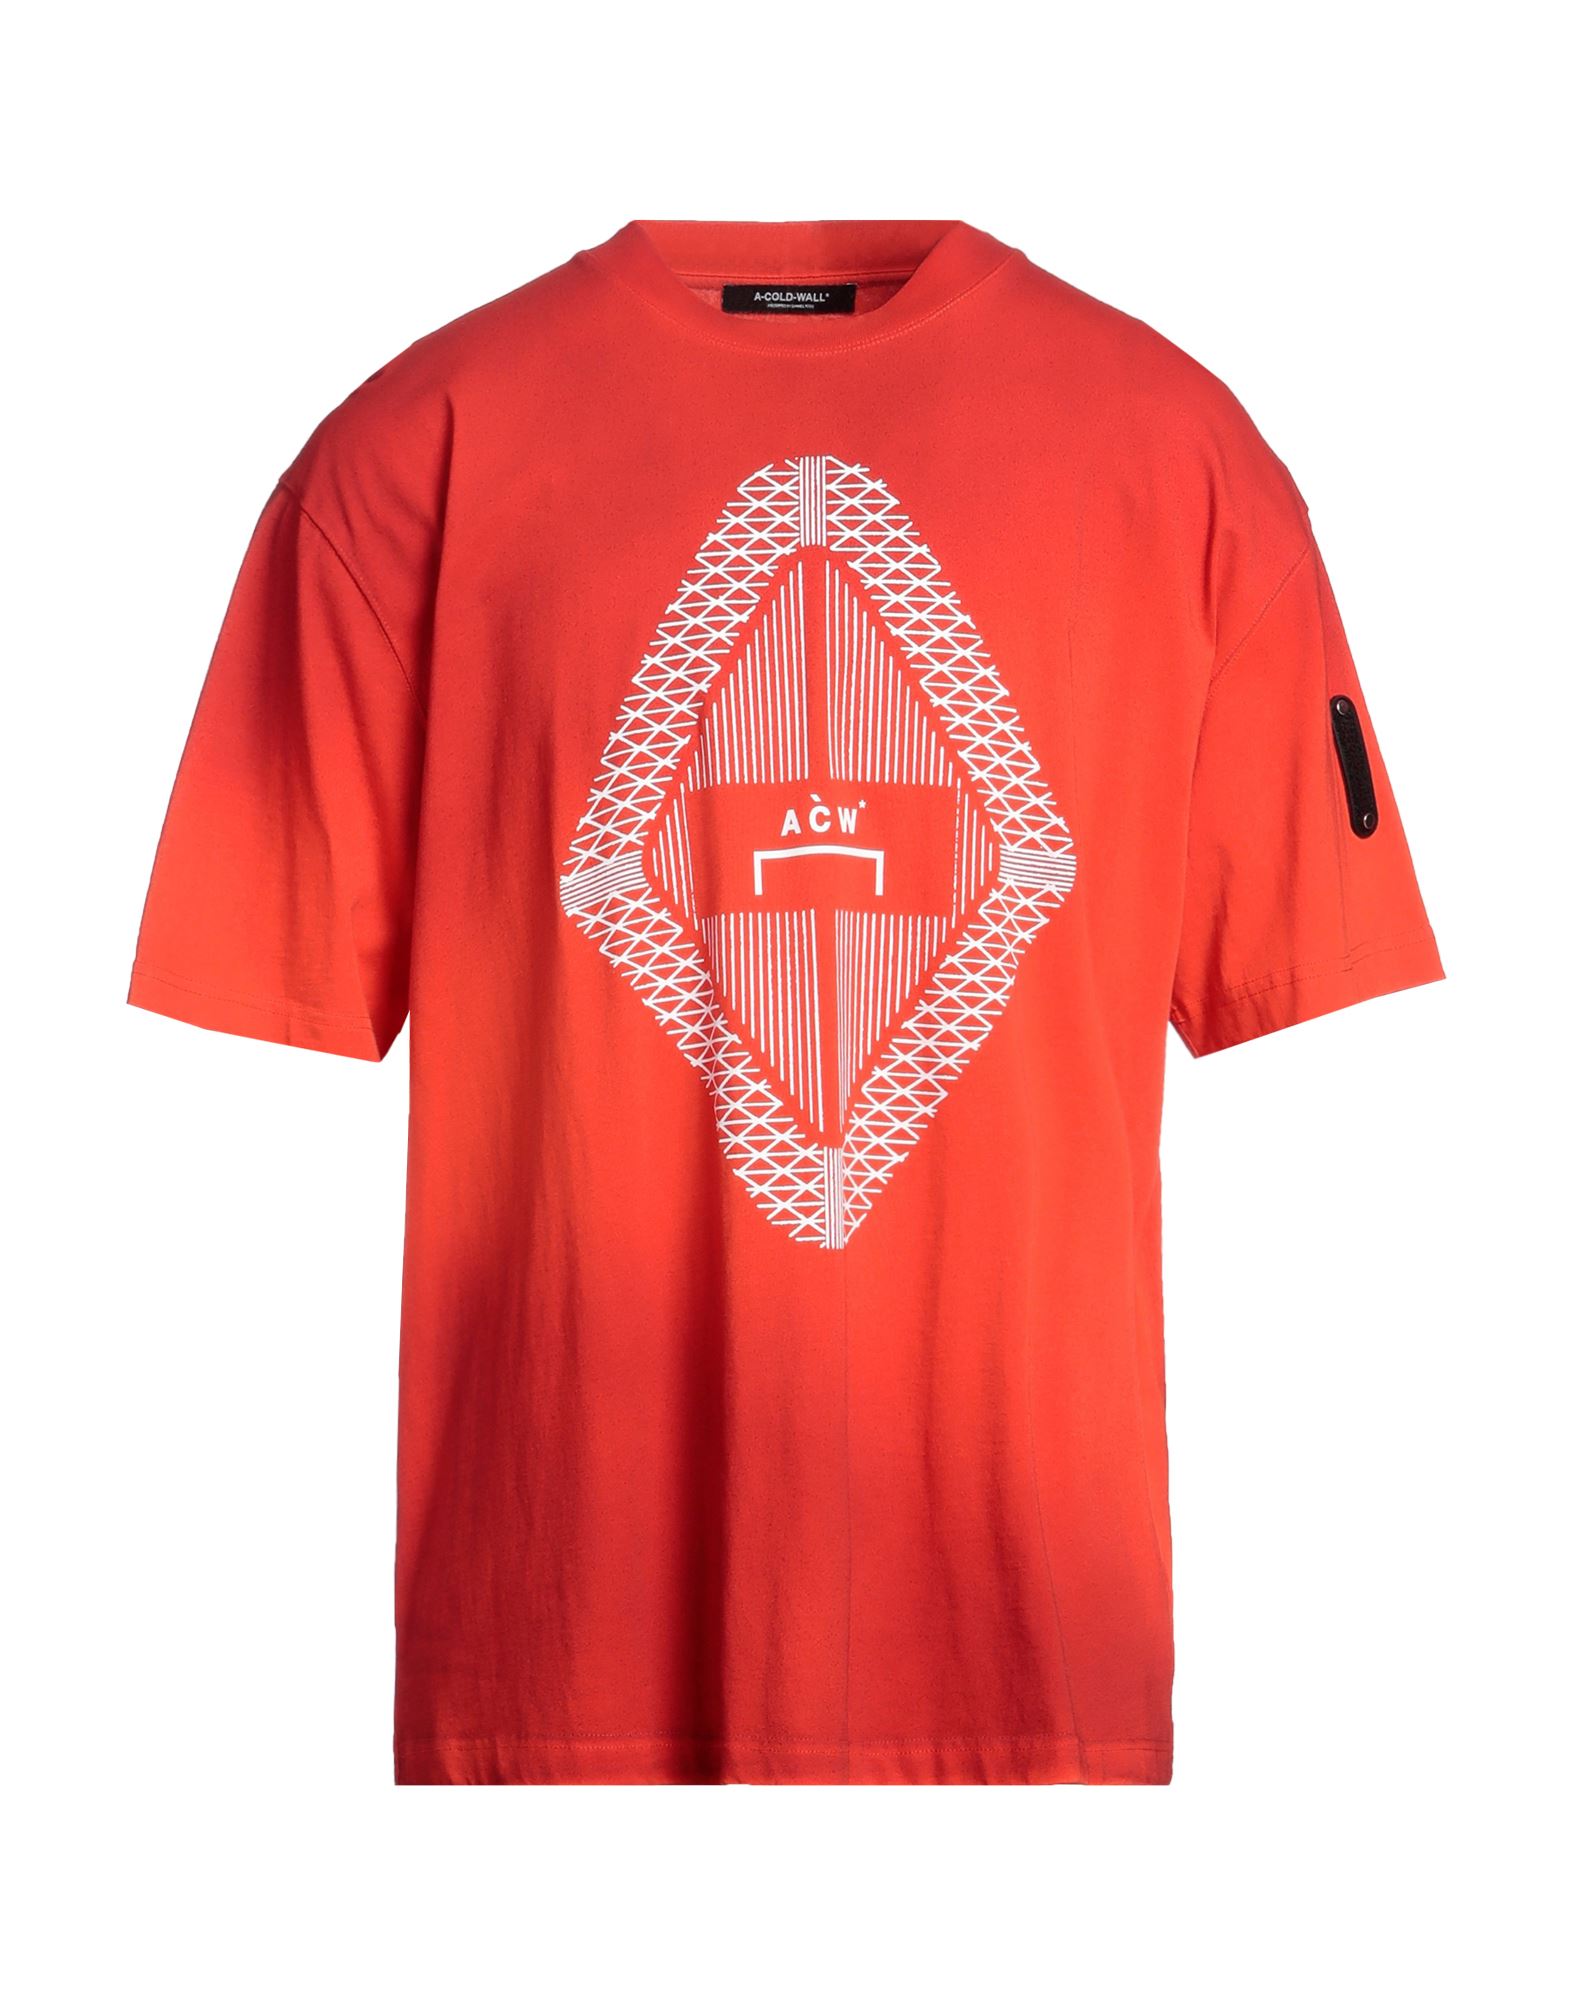 A-COLD-WALL* T-shirts Herren Rot von A-COLD-WALL*